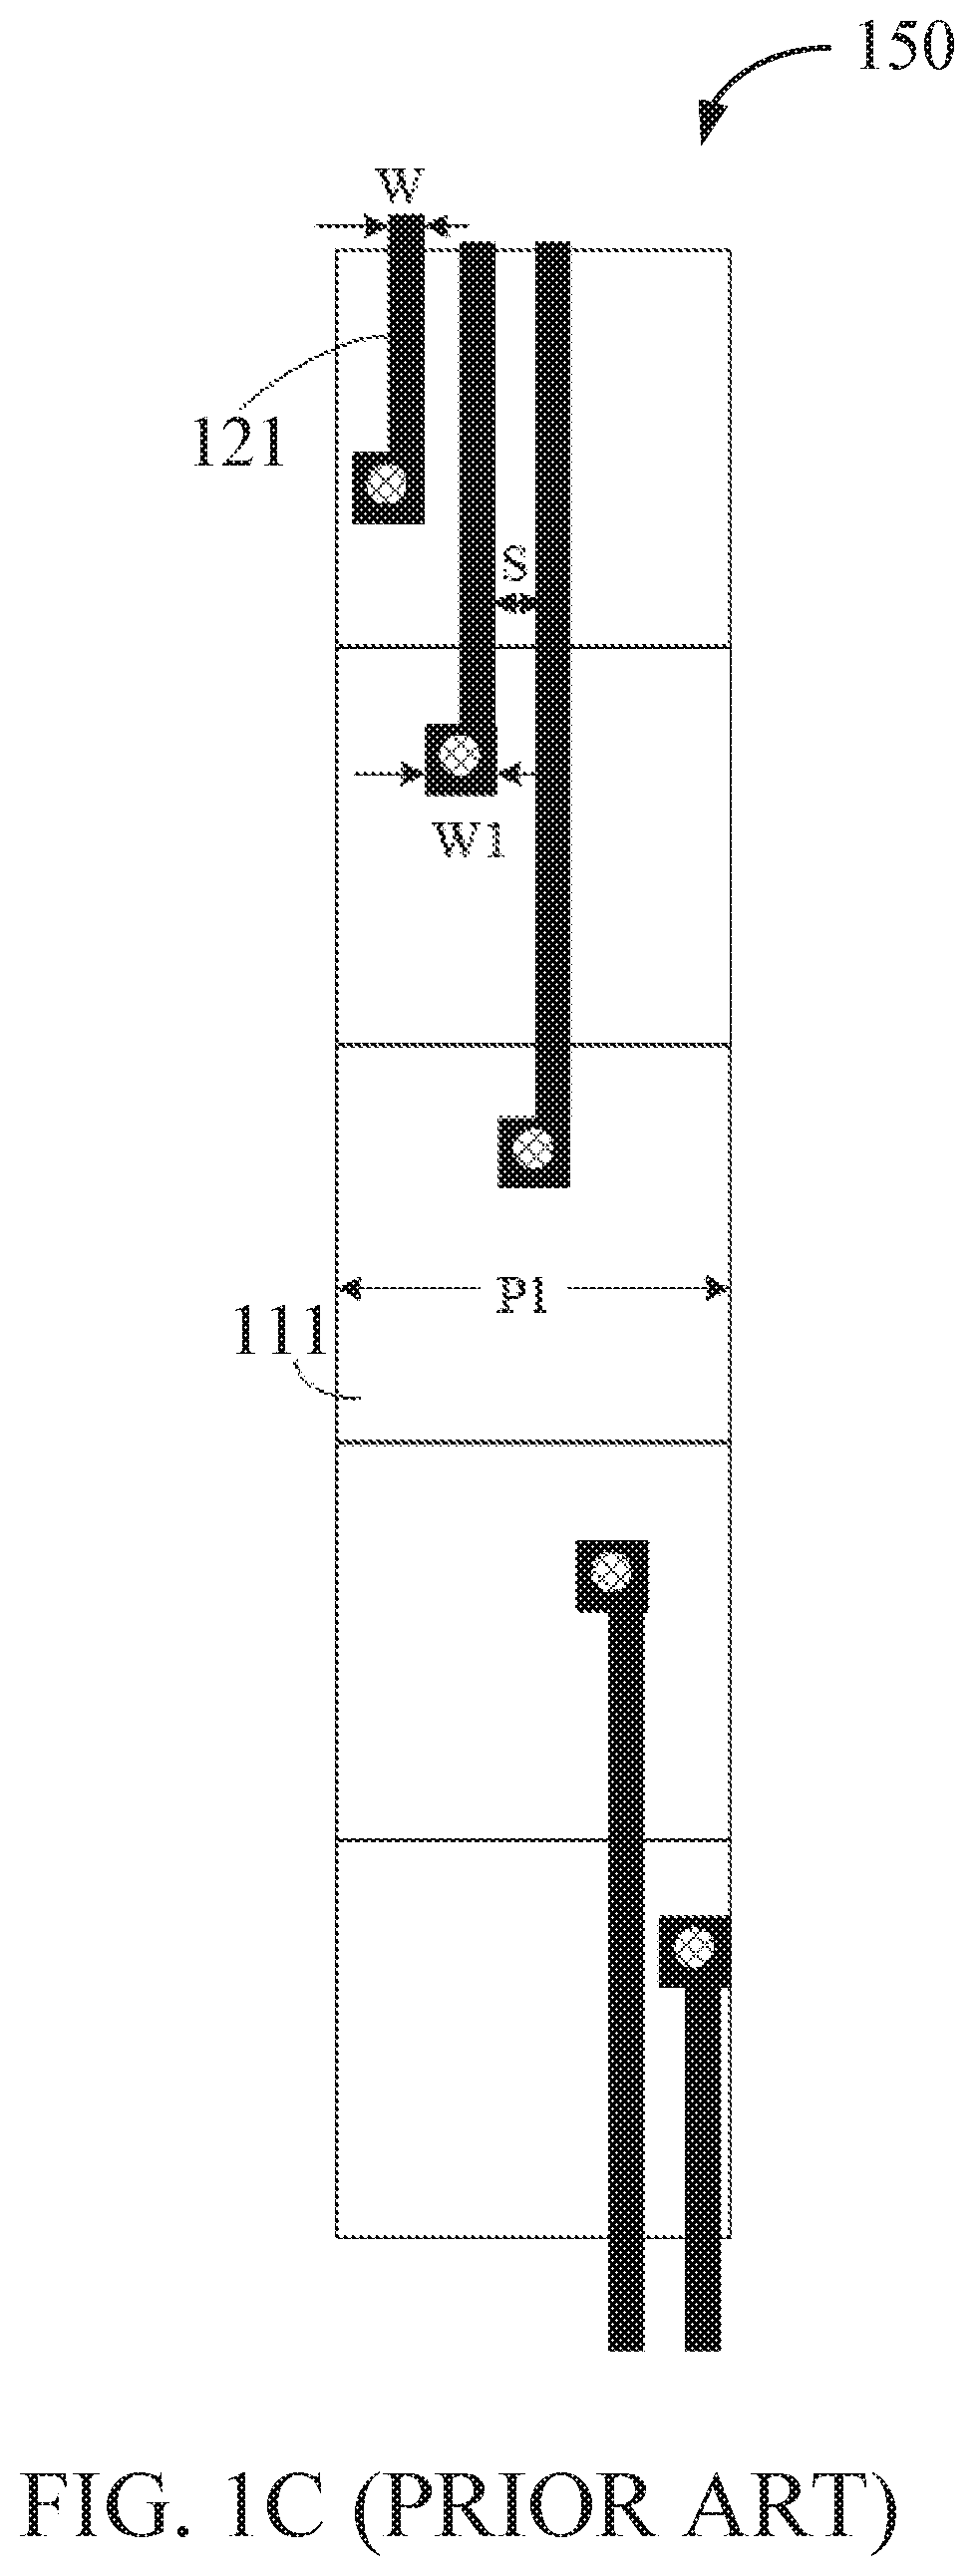 Array substrate and light field display device with overlapping signal lines